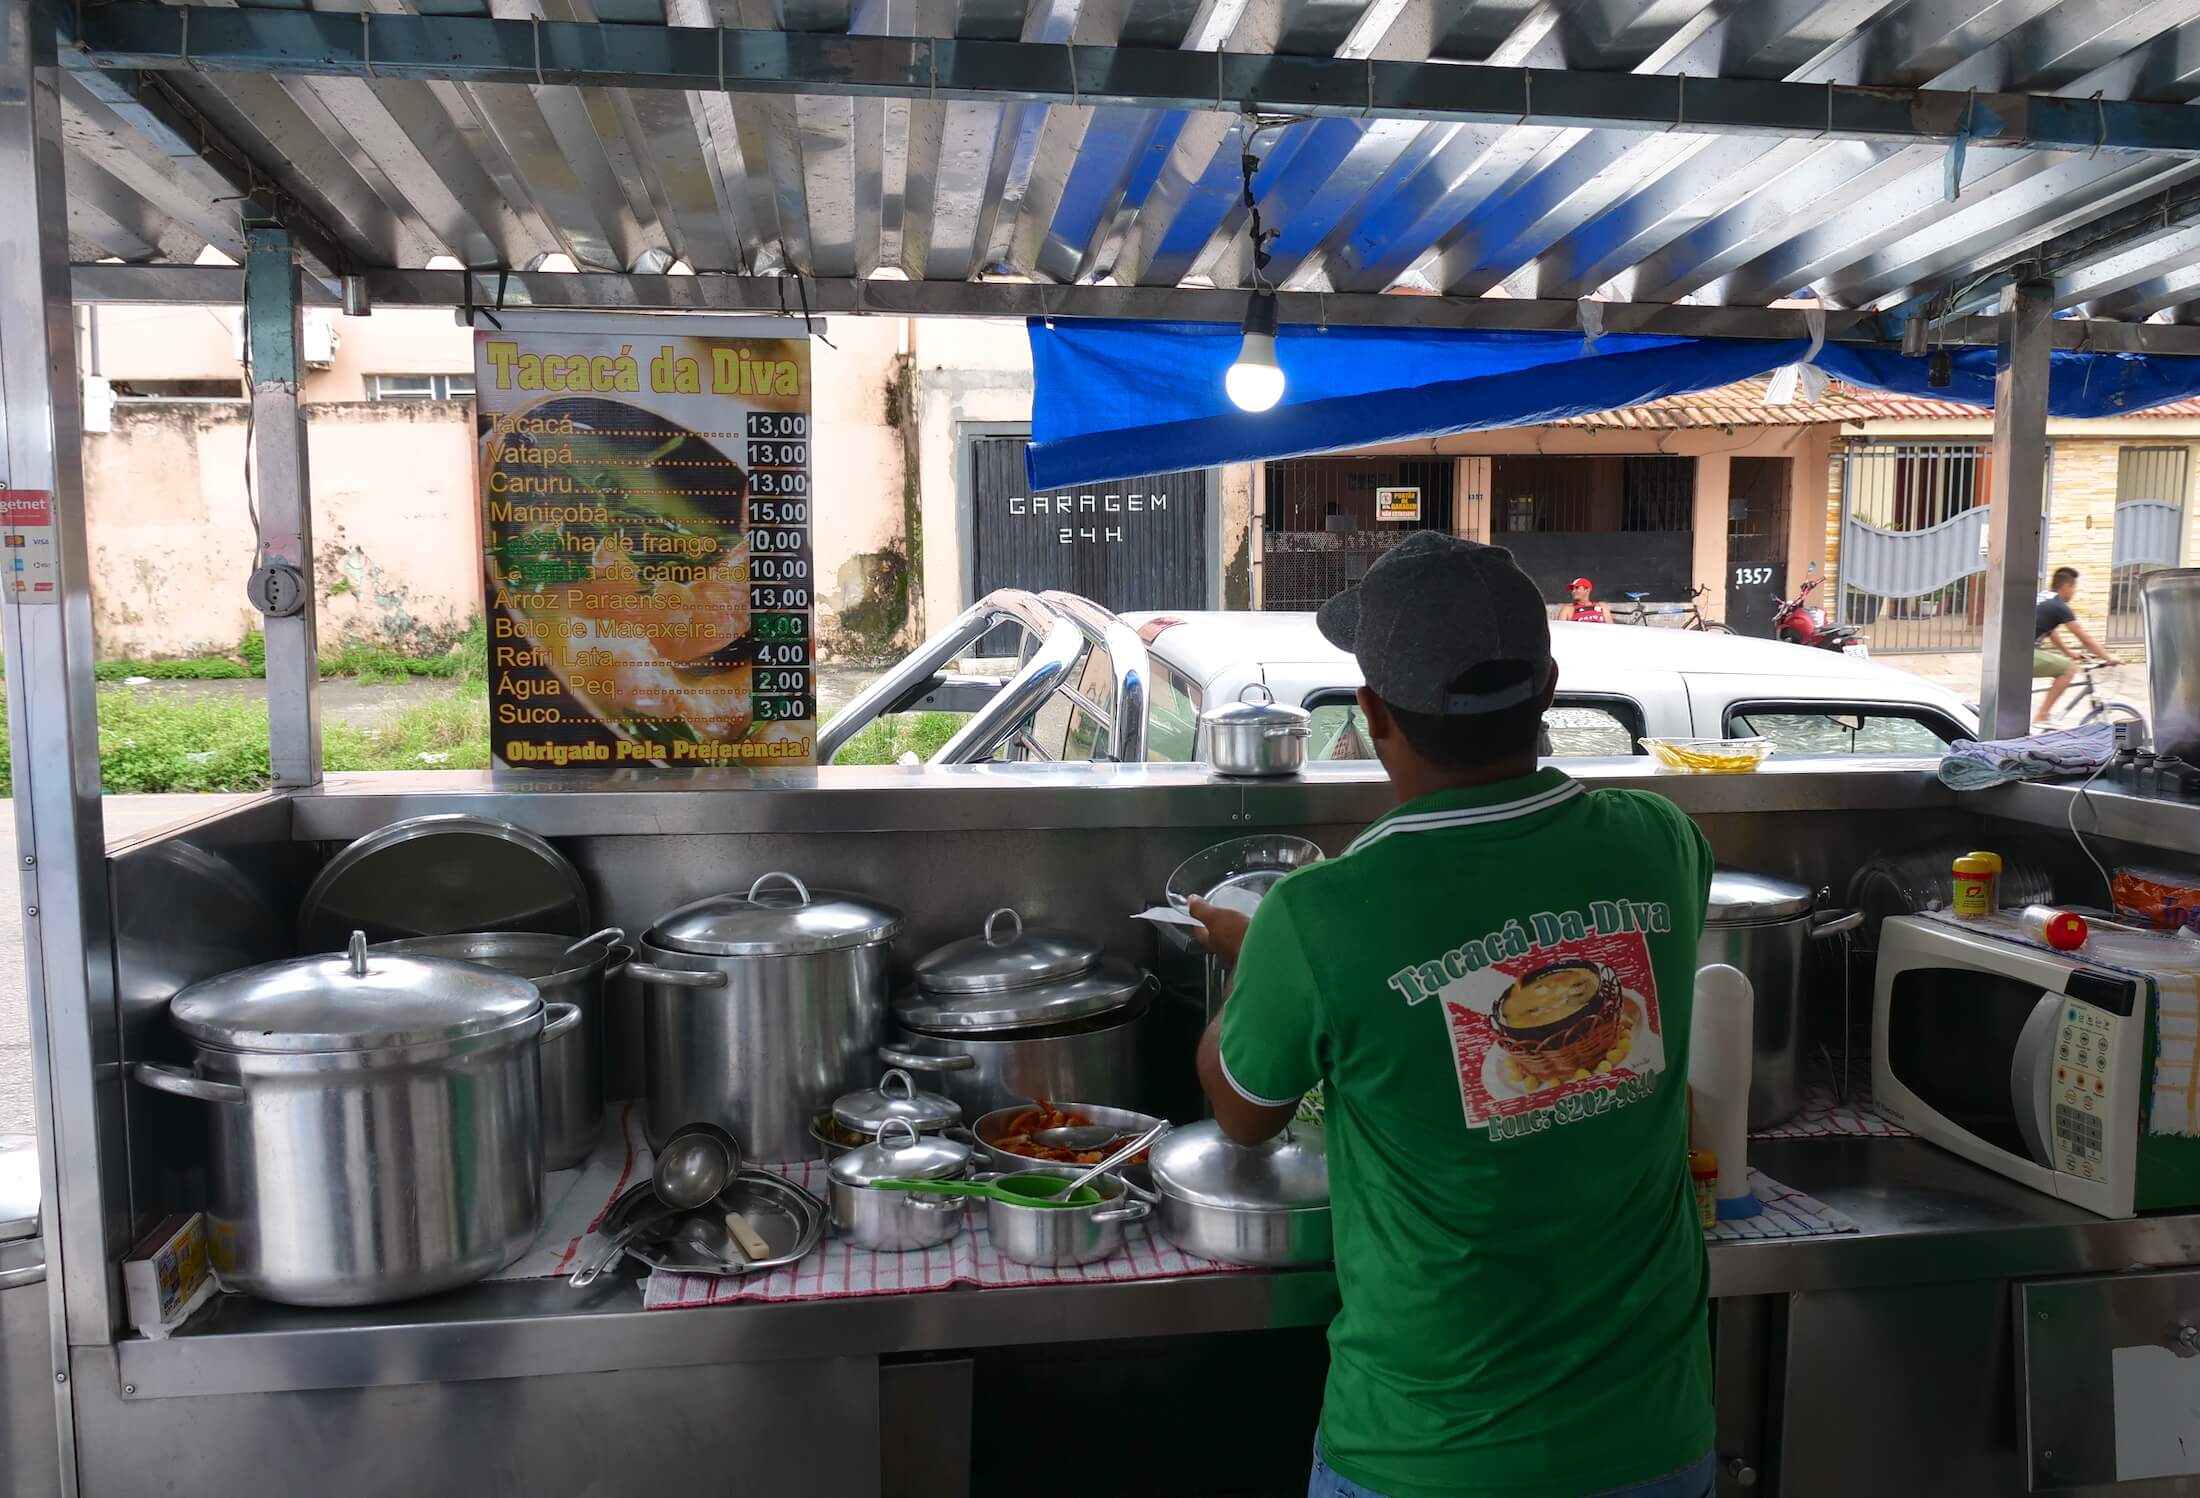 This cart is a place you need to be, Tacacá is the food to eat in Belém, somewhere around late afternoon or early evening